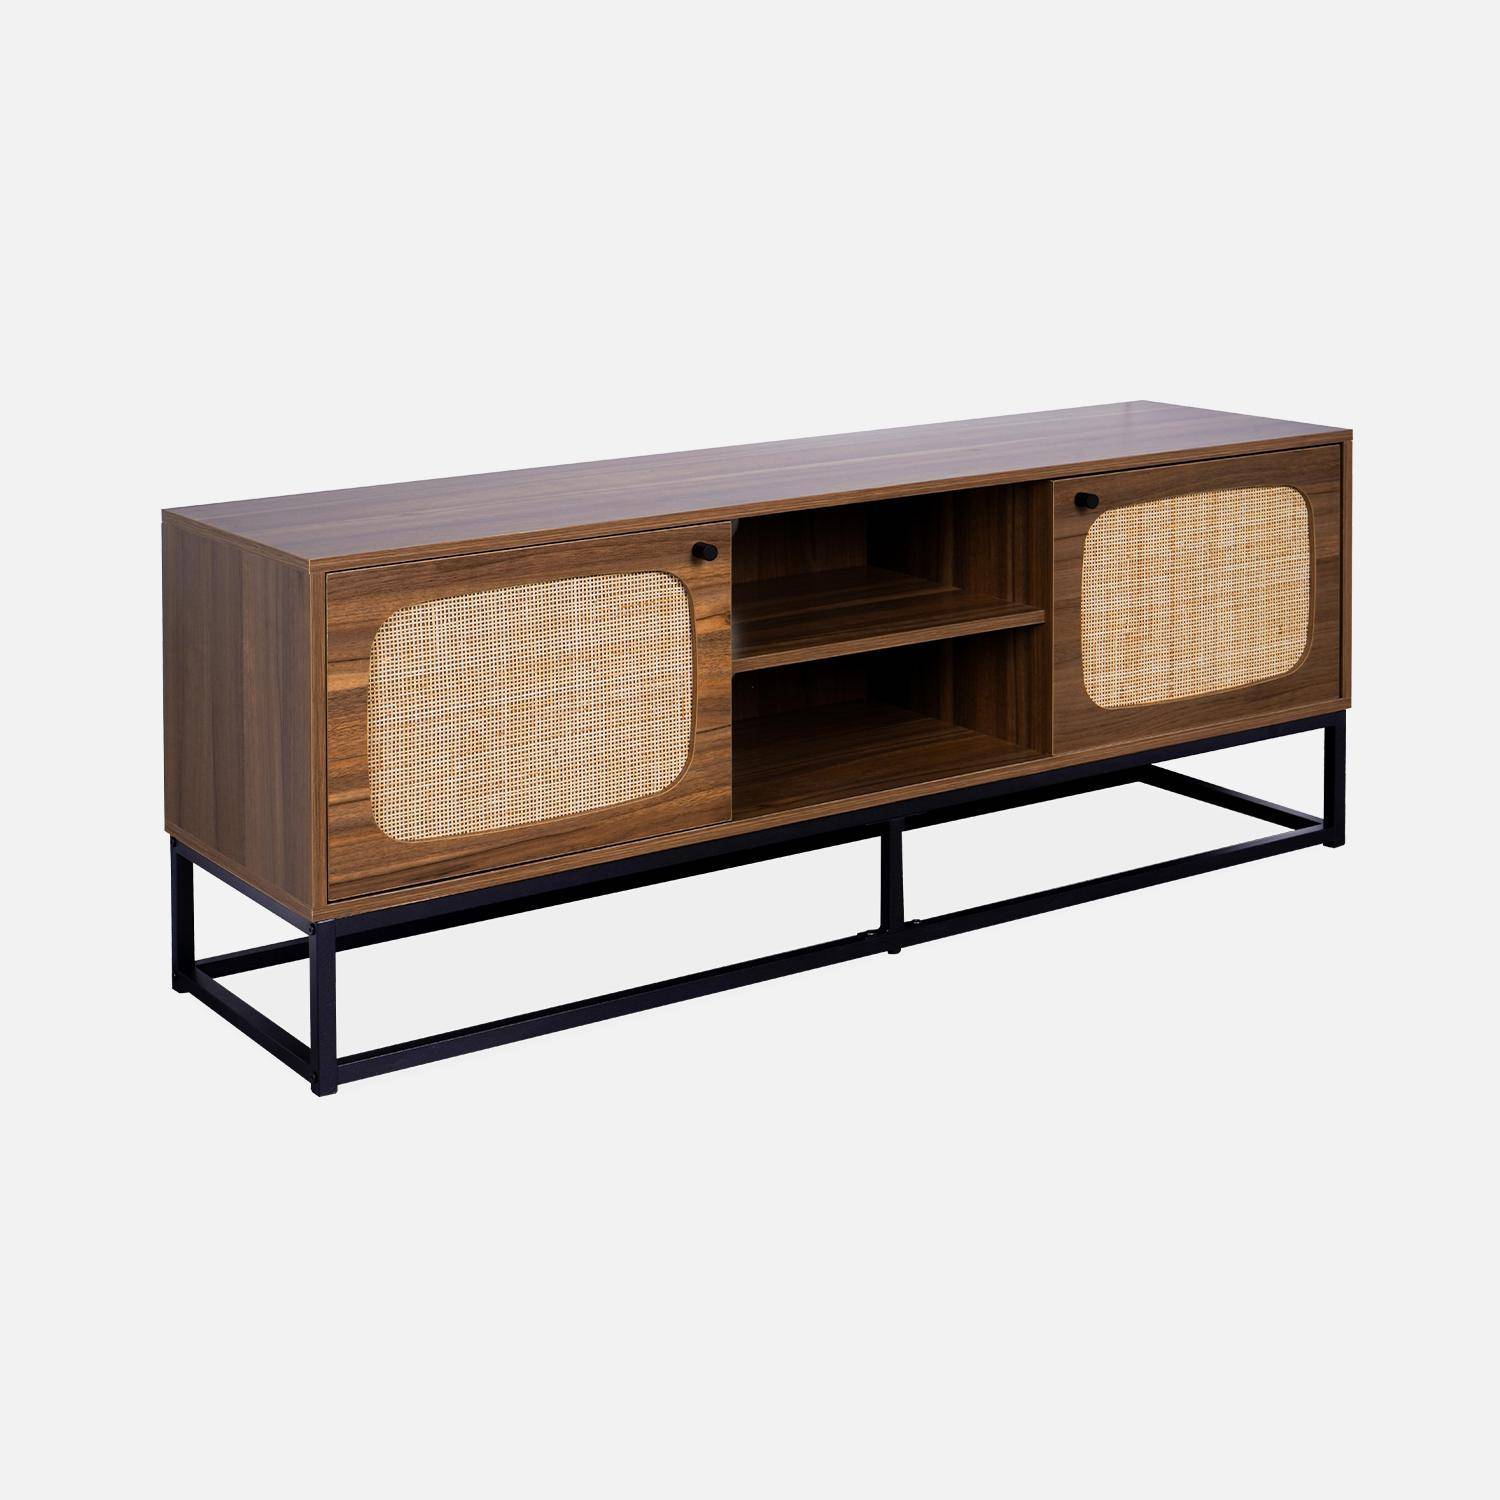 TV unit in wood decor and rounded cane 140cm, black metal legs and handles,sweeek,Photo3